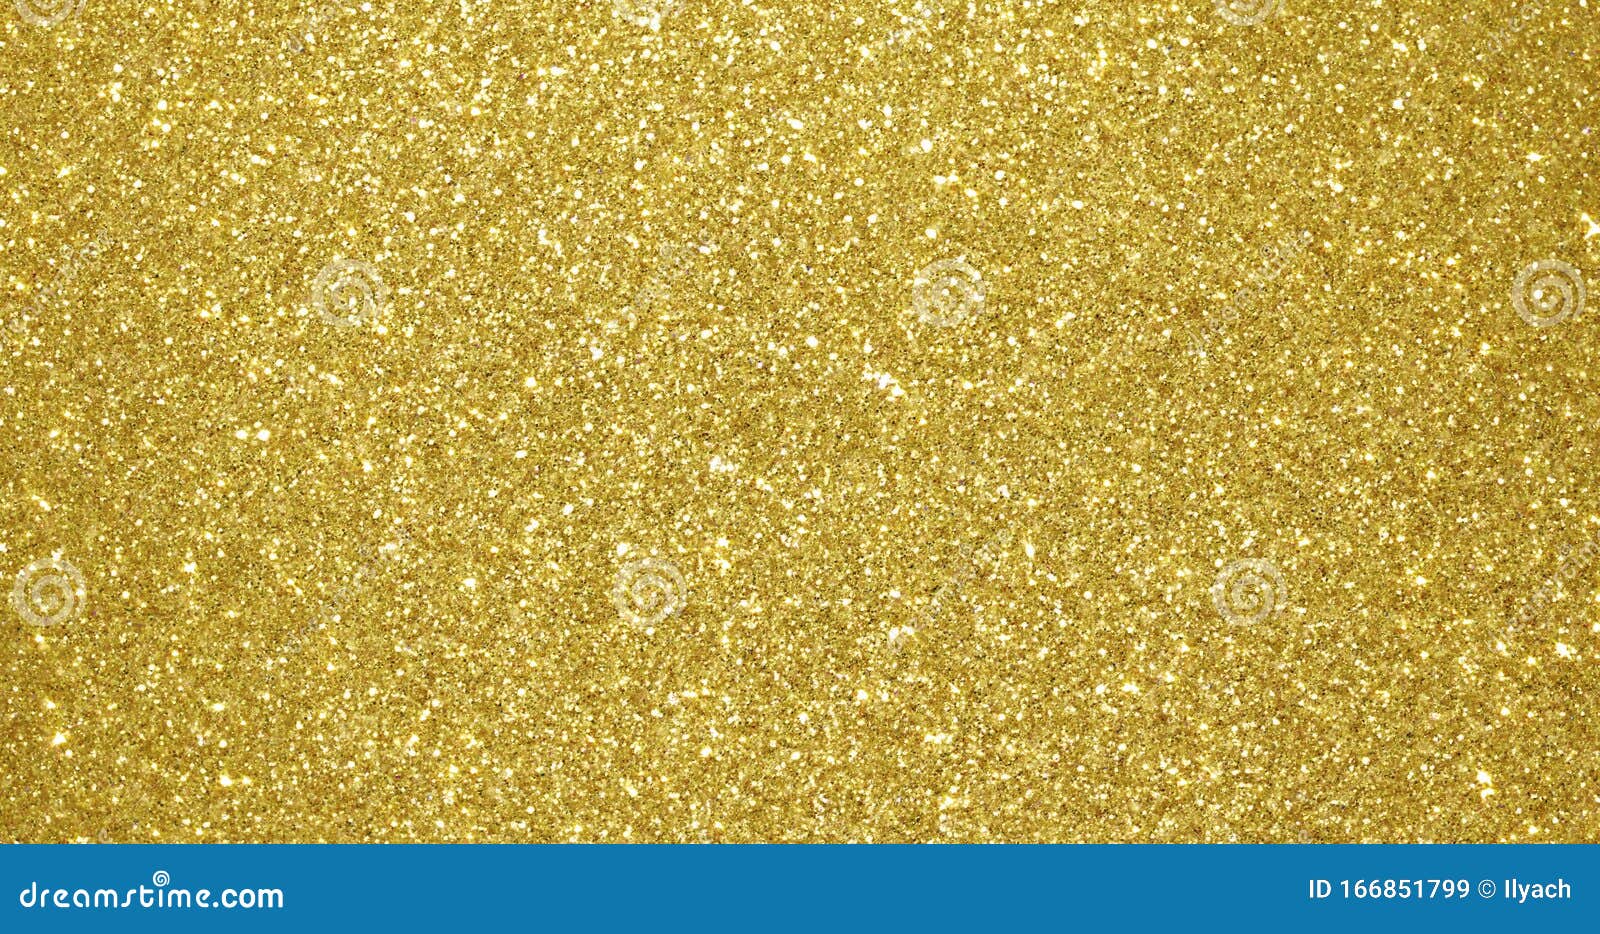 gold glitter background, sparkling shimmer glow particles texture. golden light sparks and glittering foil sequins background with